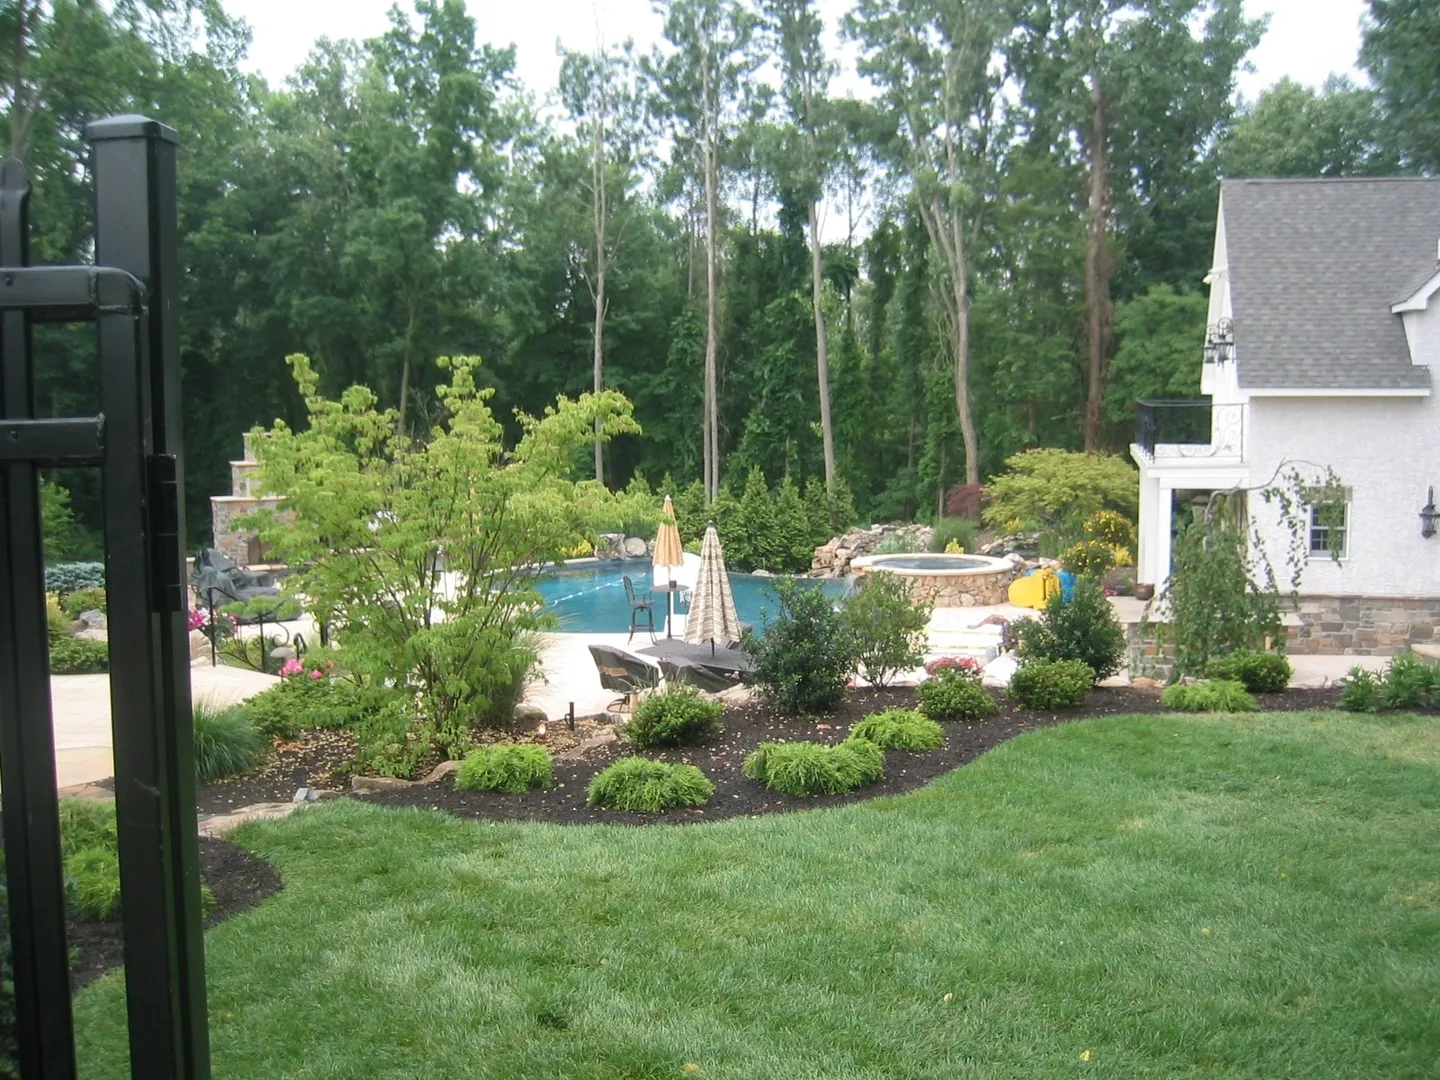 view of the pool from behind some plants